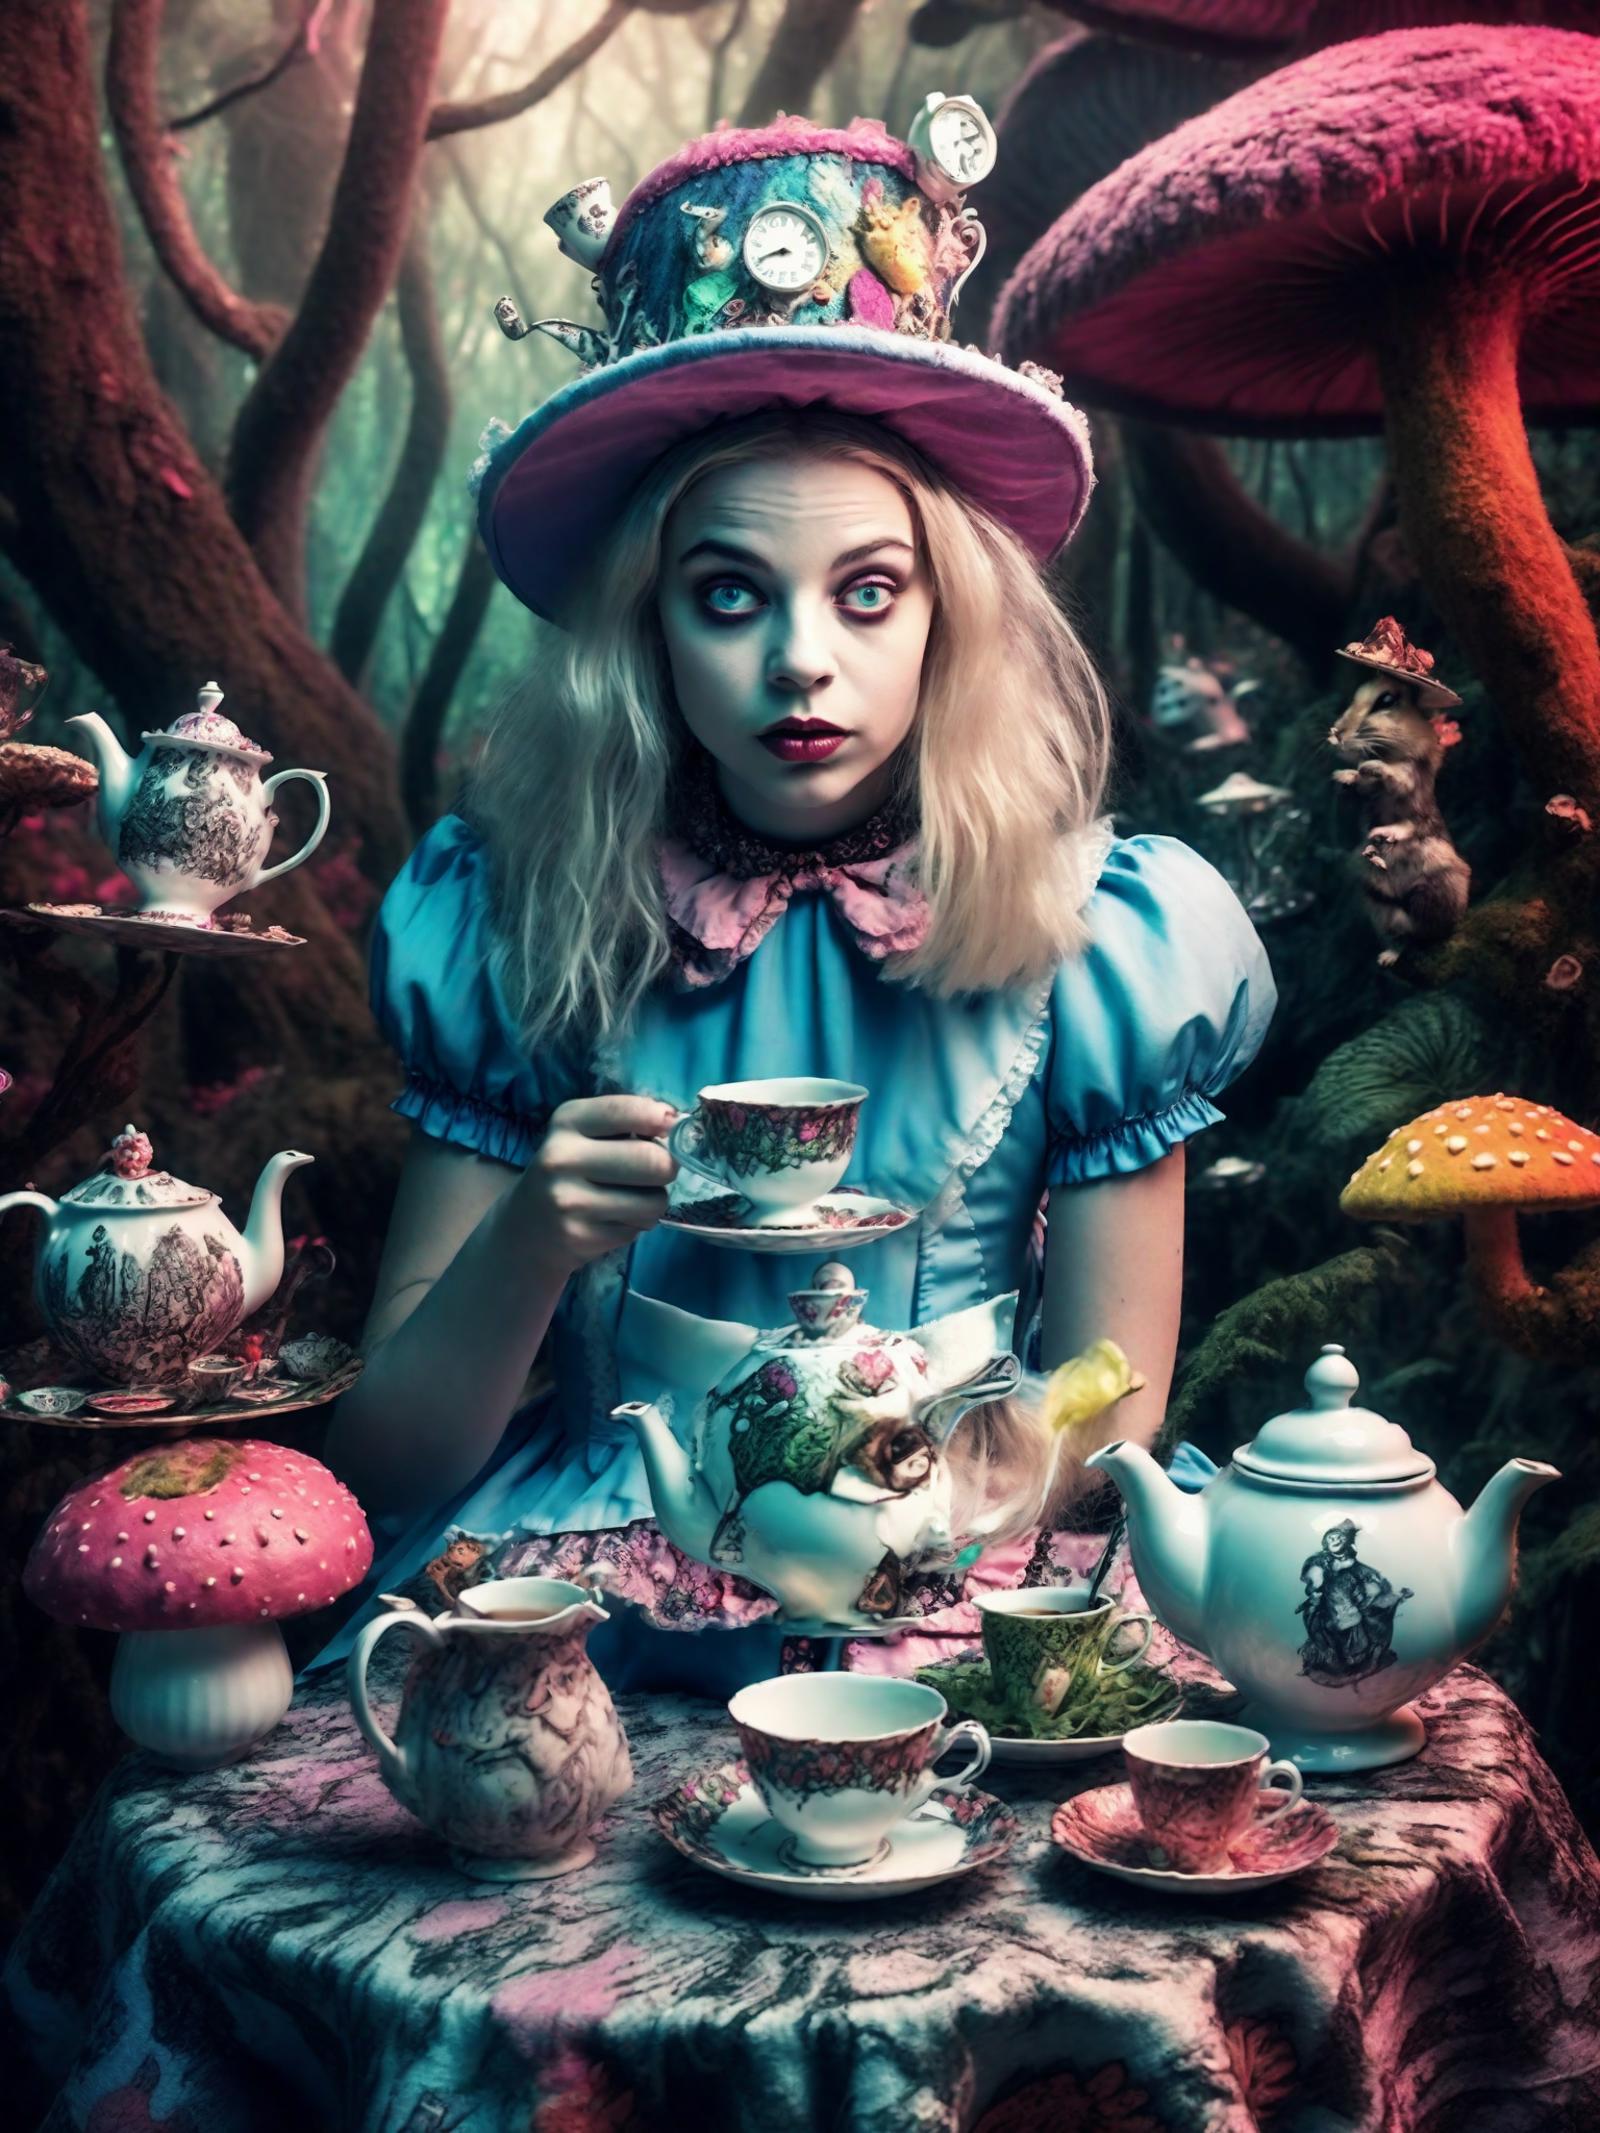 A woman wearing a blue dress and a hat is sitting in front of a tea set, holding a cup. The scene features a variety of teapots and cups on the table, along with a cake and a spoon. The woman is surrounded by a whimsical and fantastical environment, with multiple teddy bears and a mushroom in the background. The image appears to be a surreal and imaginative scene, possibly inspired by Lewis Carroll's "Alice in Wonderland."